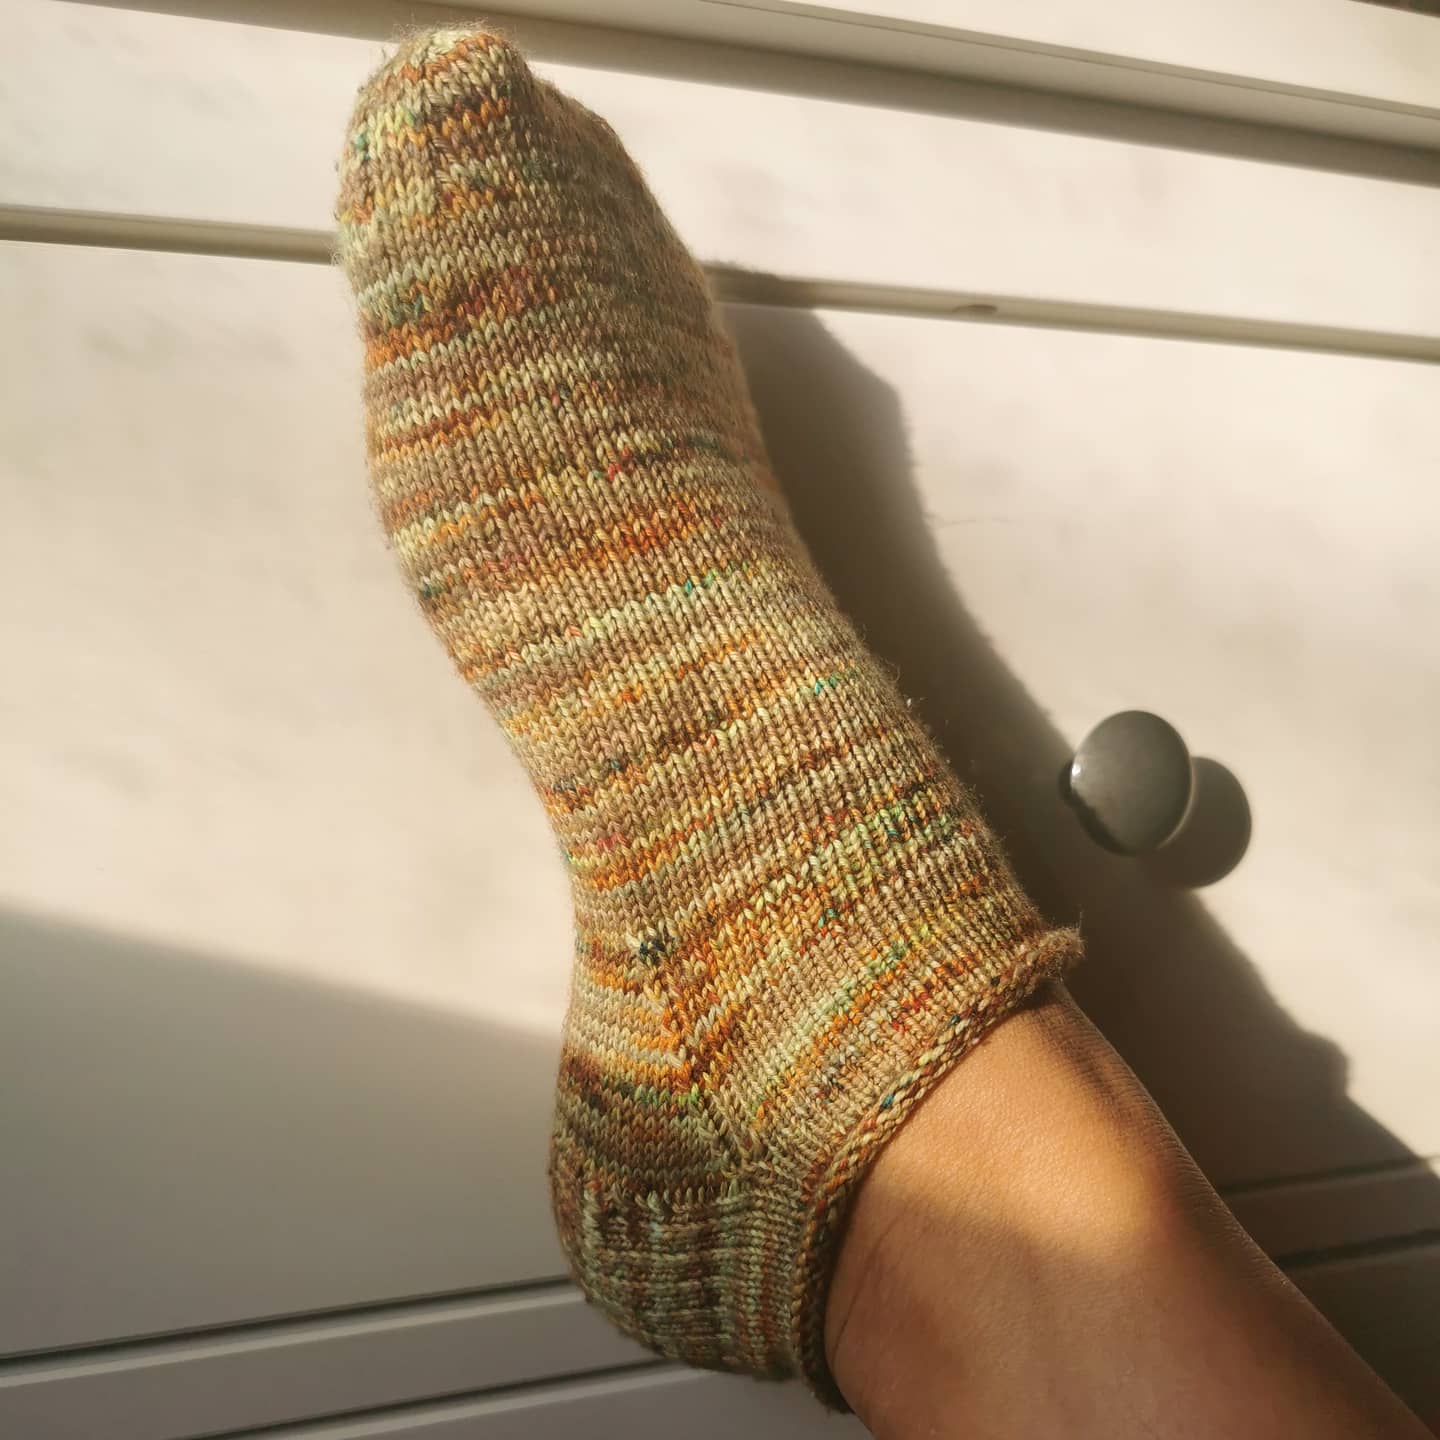 Mindful knitting - A foot wearing a short hand knitted sock